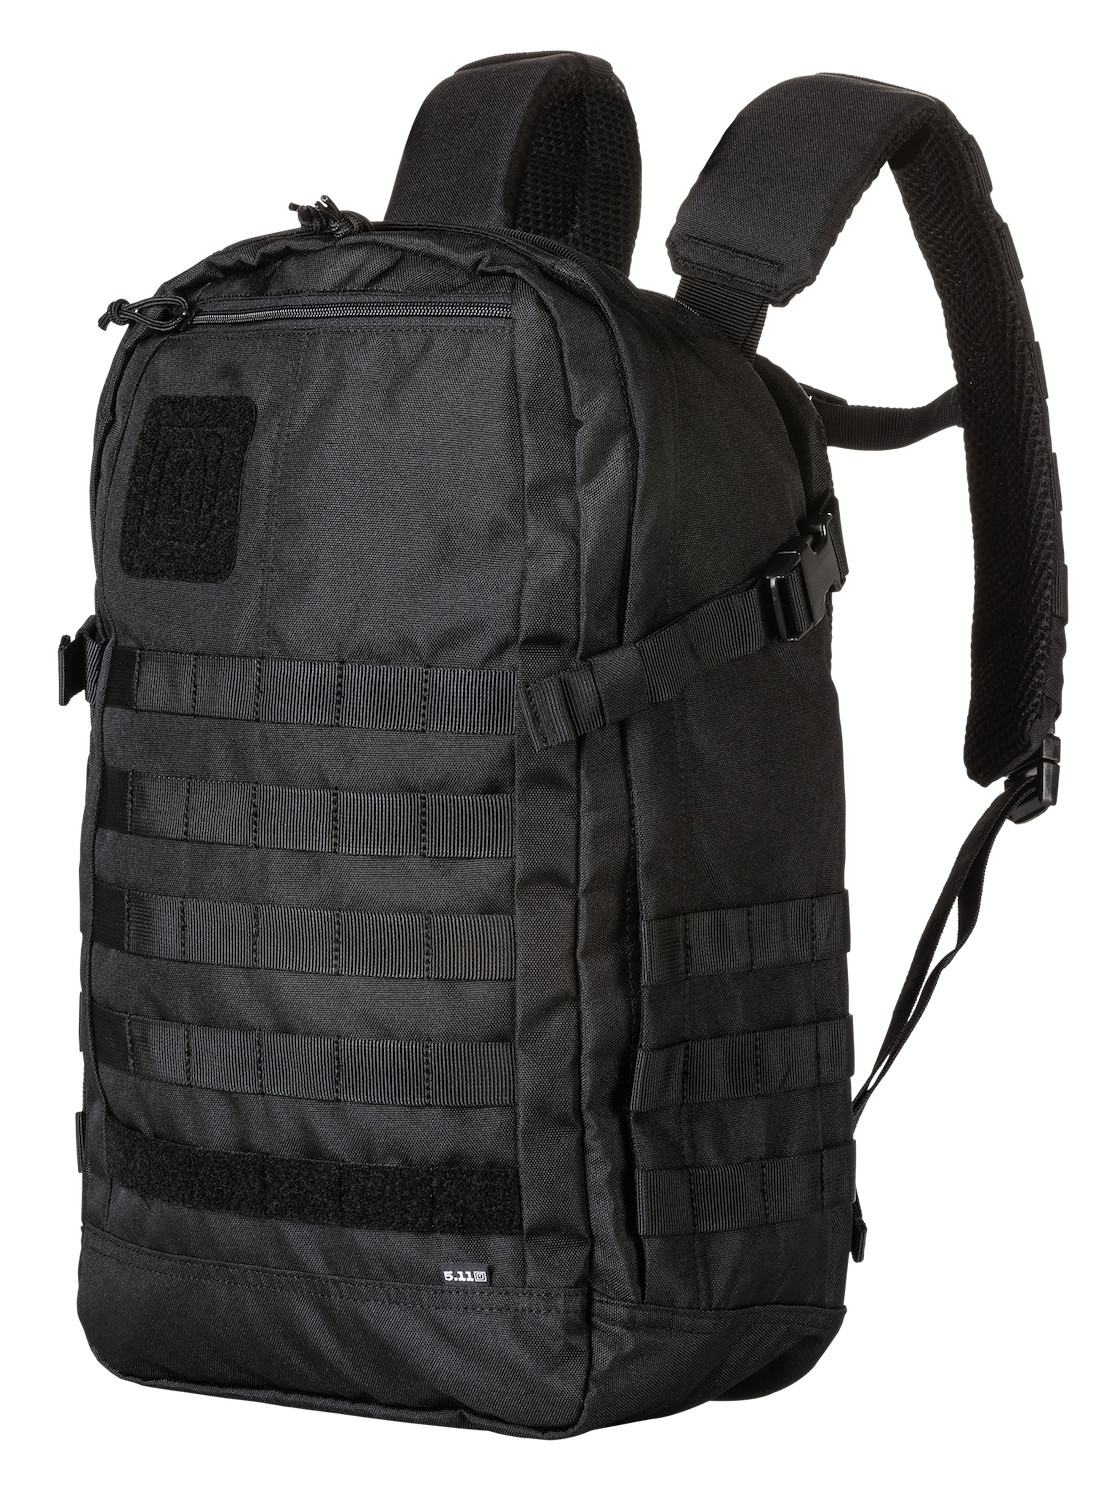 Wisport Raccoon 65L Backpack Hunting MOLLE Hiking Police Military Army Black 